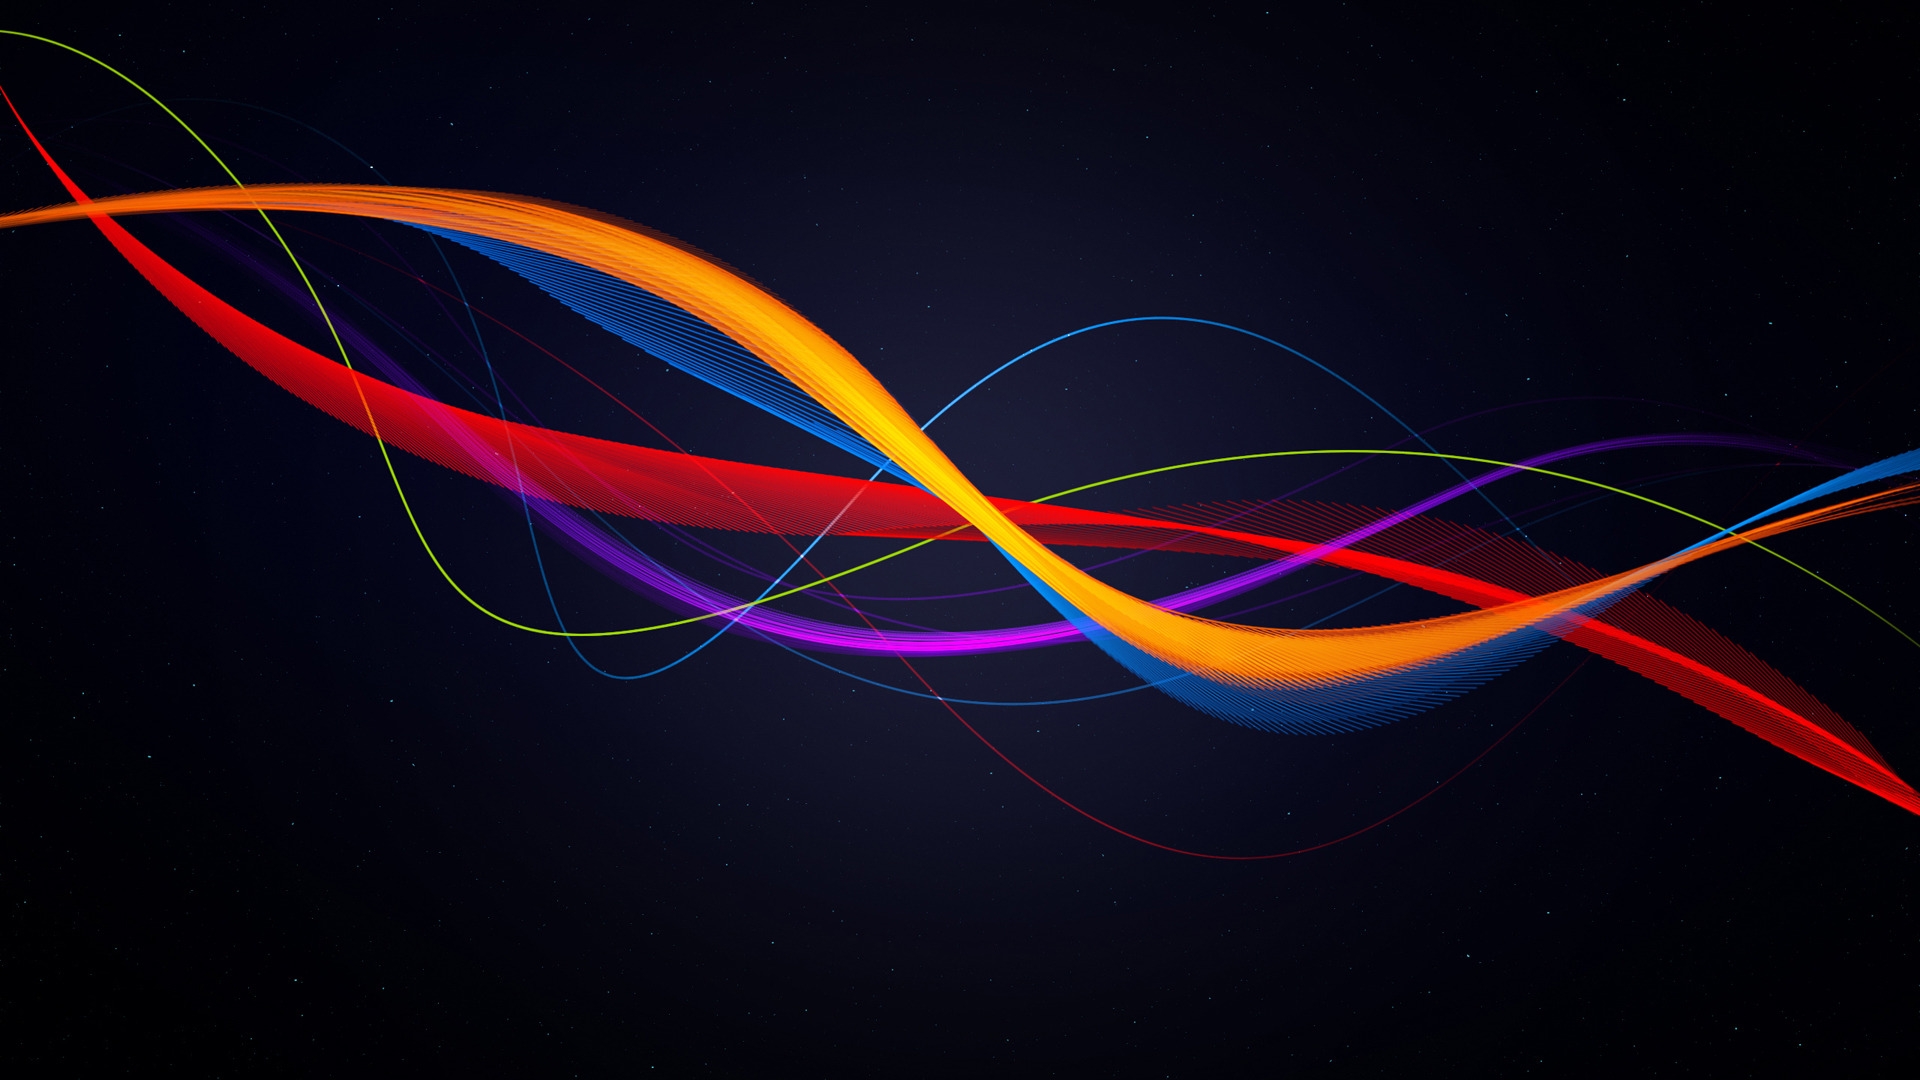 Colored Ribbons for 1920 x 1080 HDTV 1080p resolution